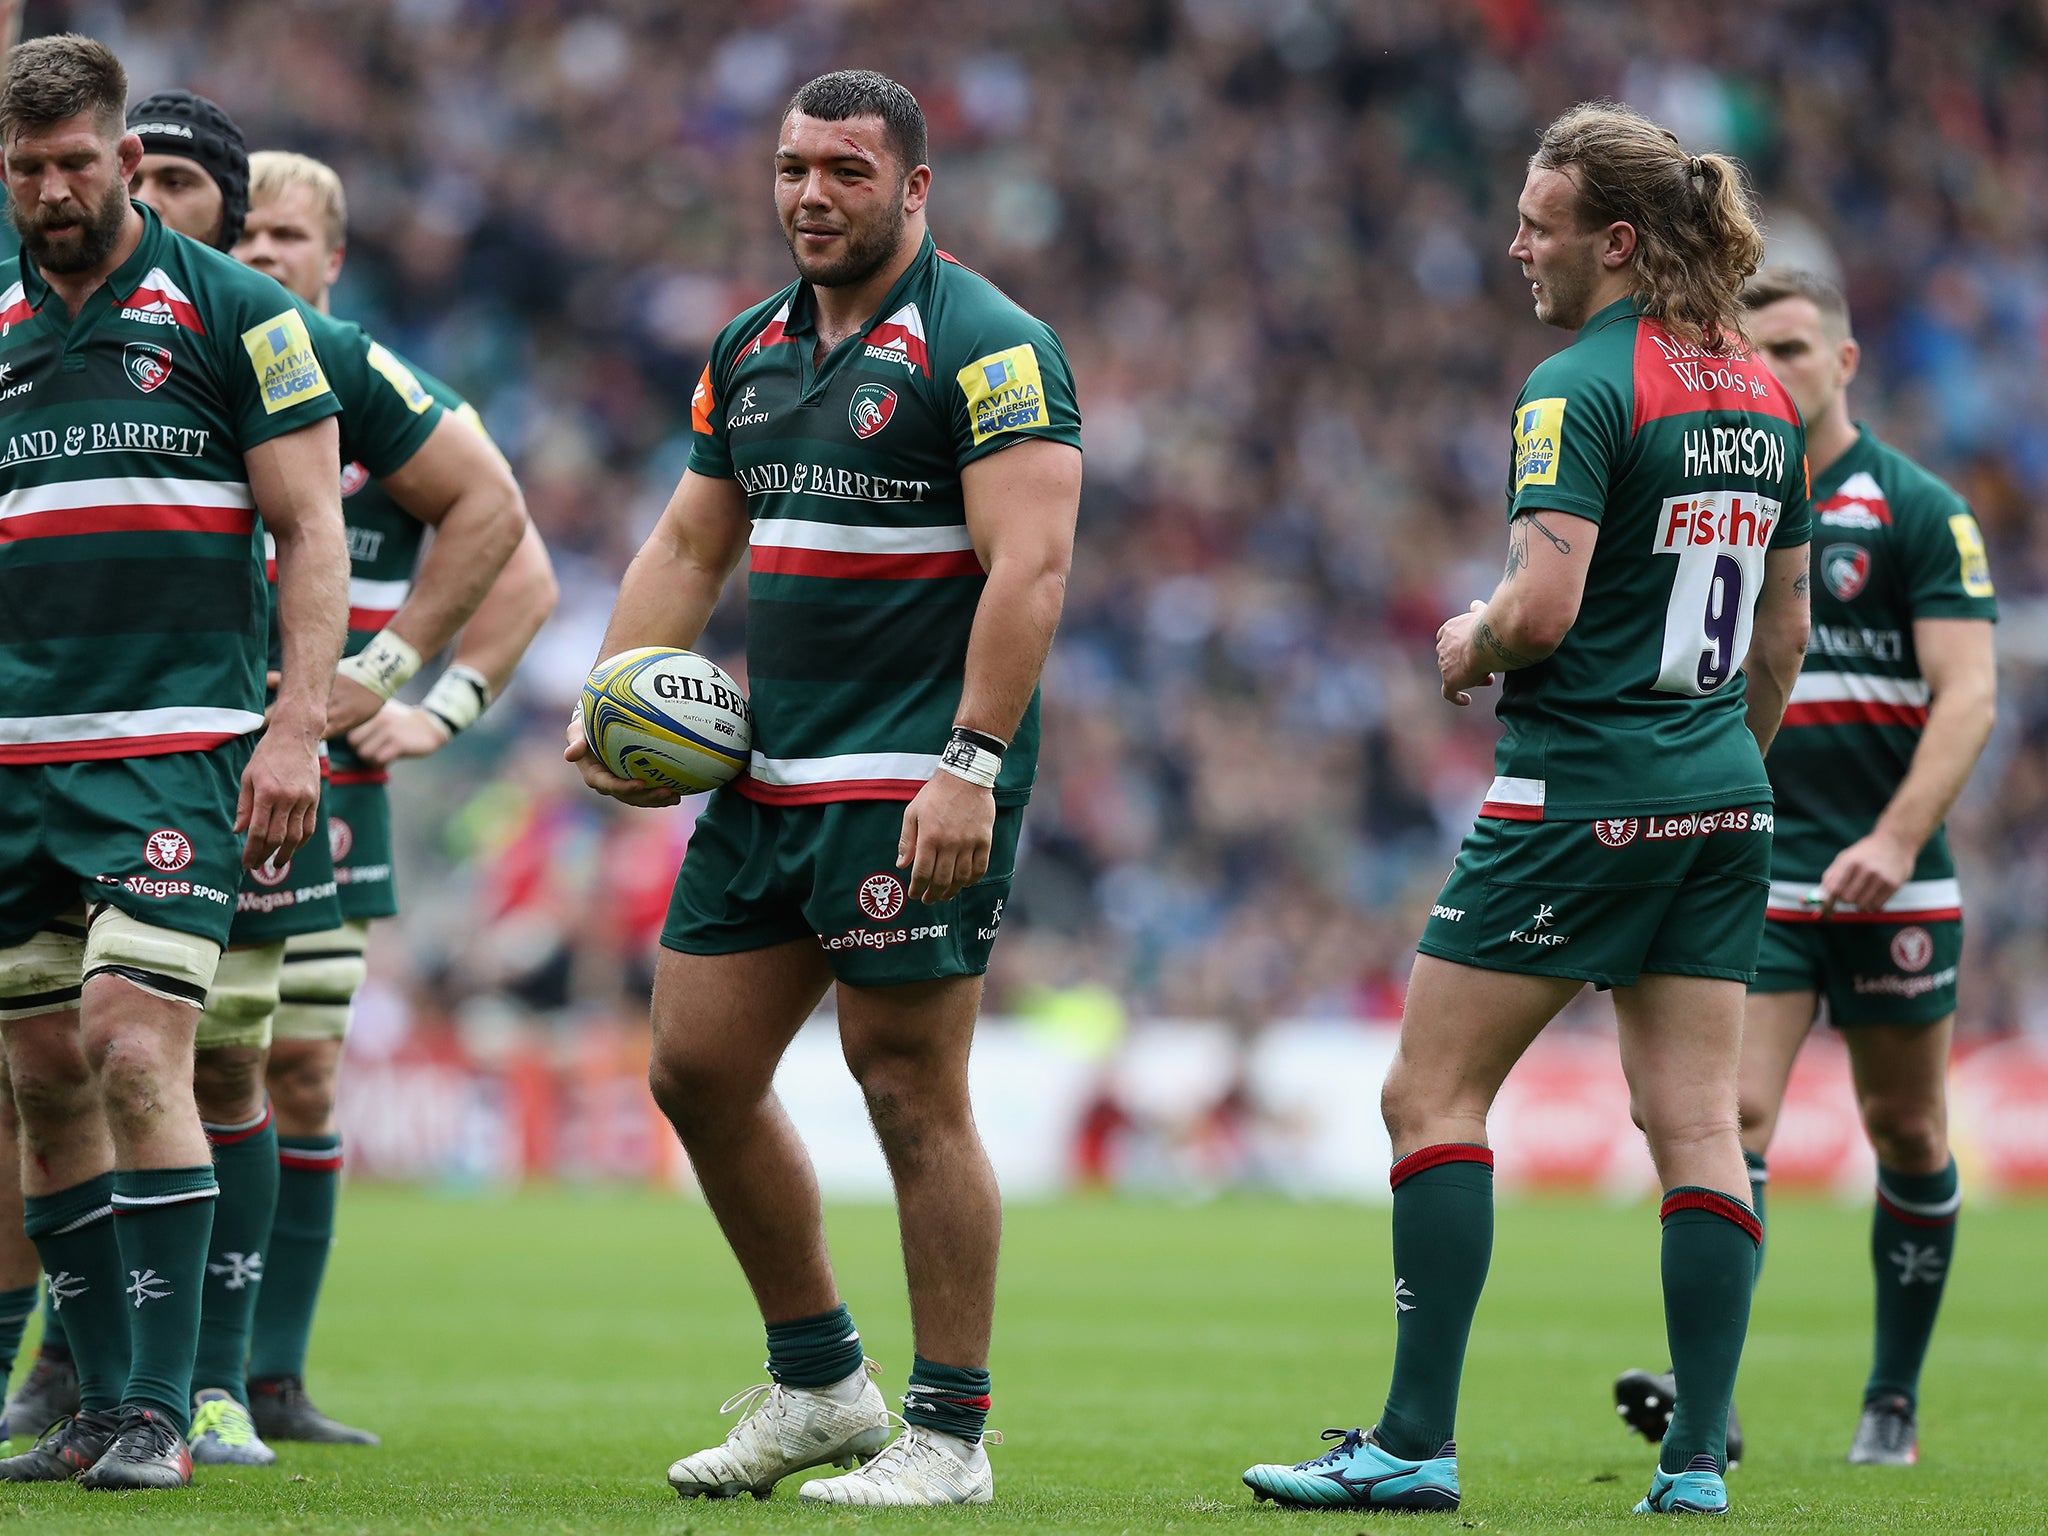 The Leicester front-row destroyed their Bath rivals in the scrum